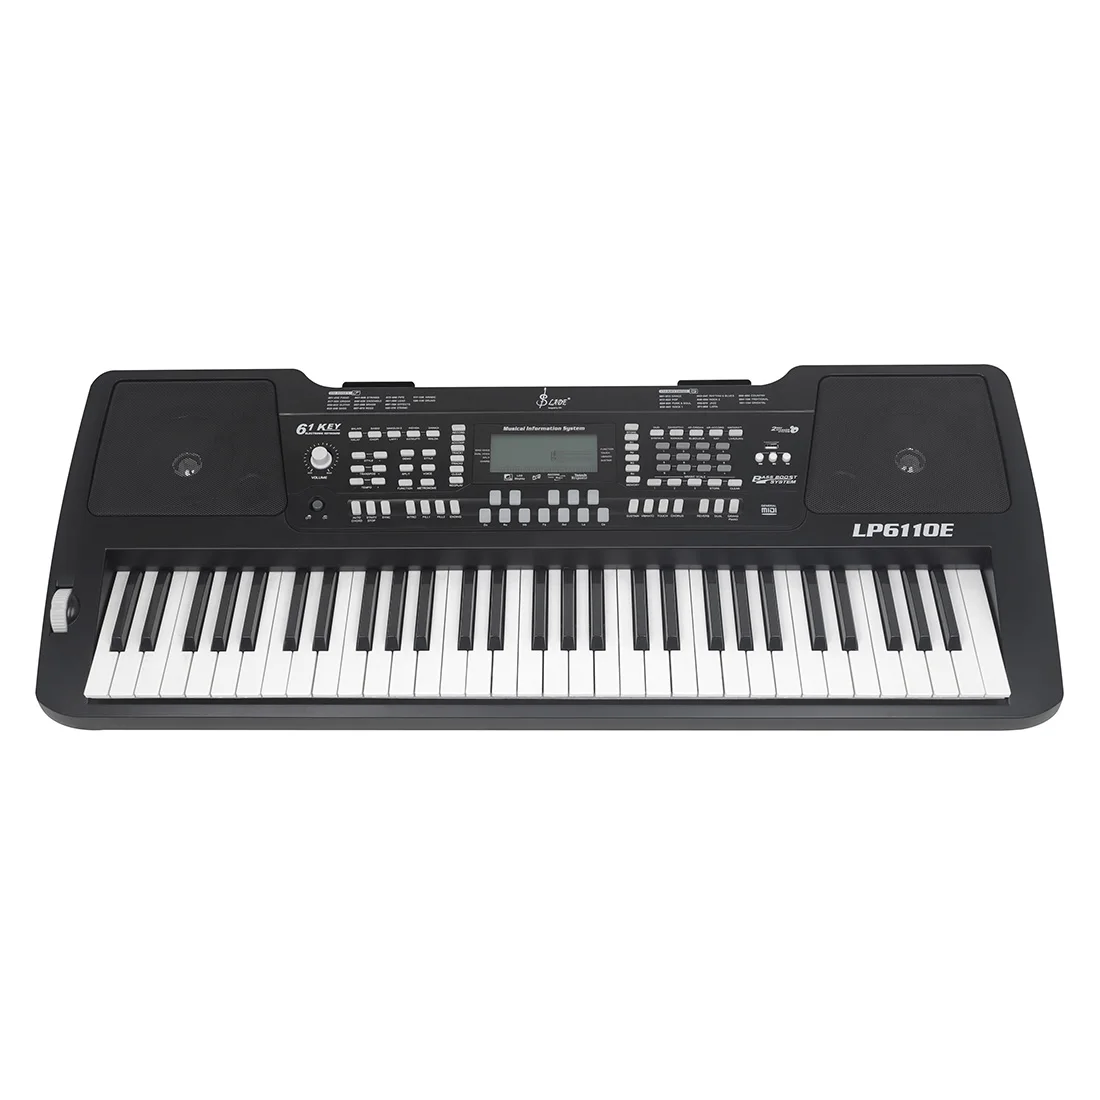 Musical instrument factory Slade hot sell OEM Electronic Organ Piano professional 61 Keys LCD display Electric Piano Keyboard